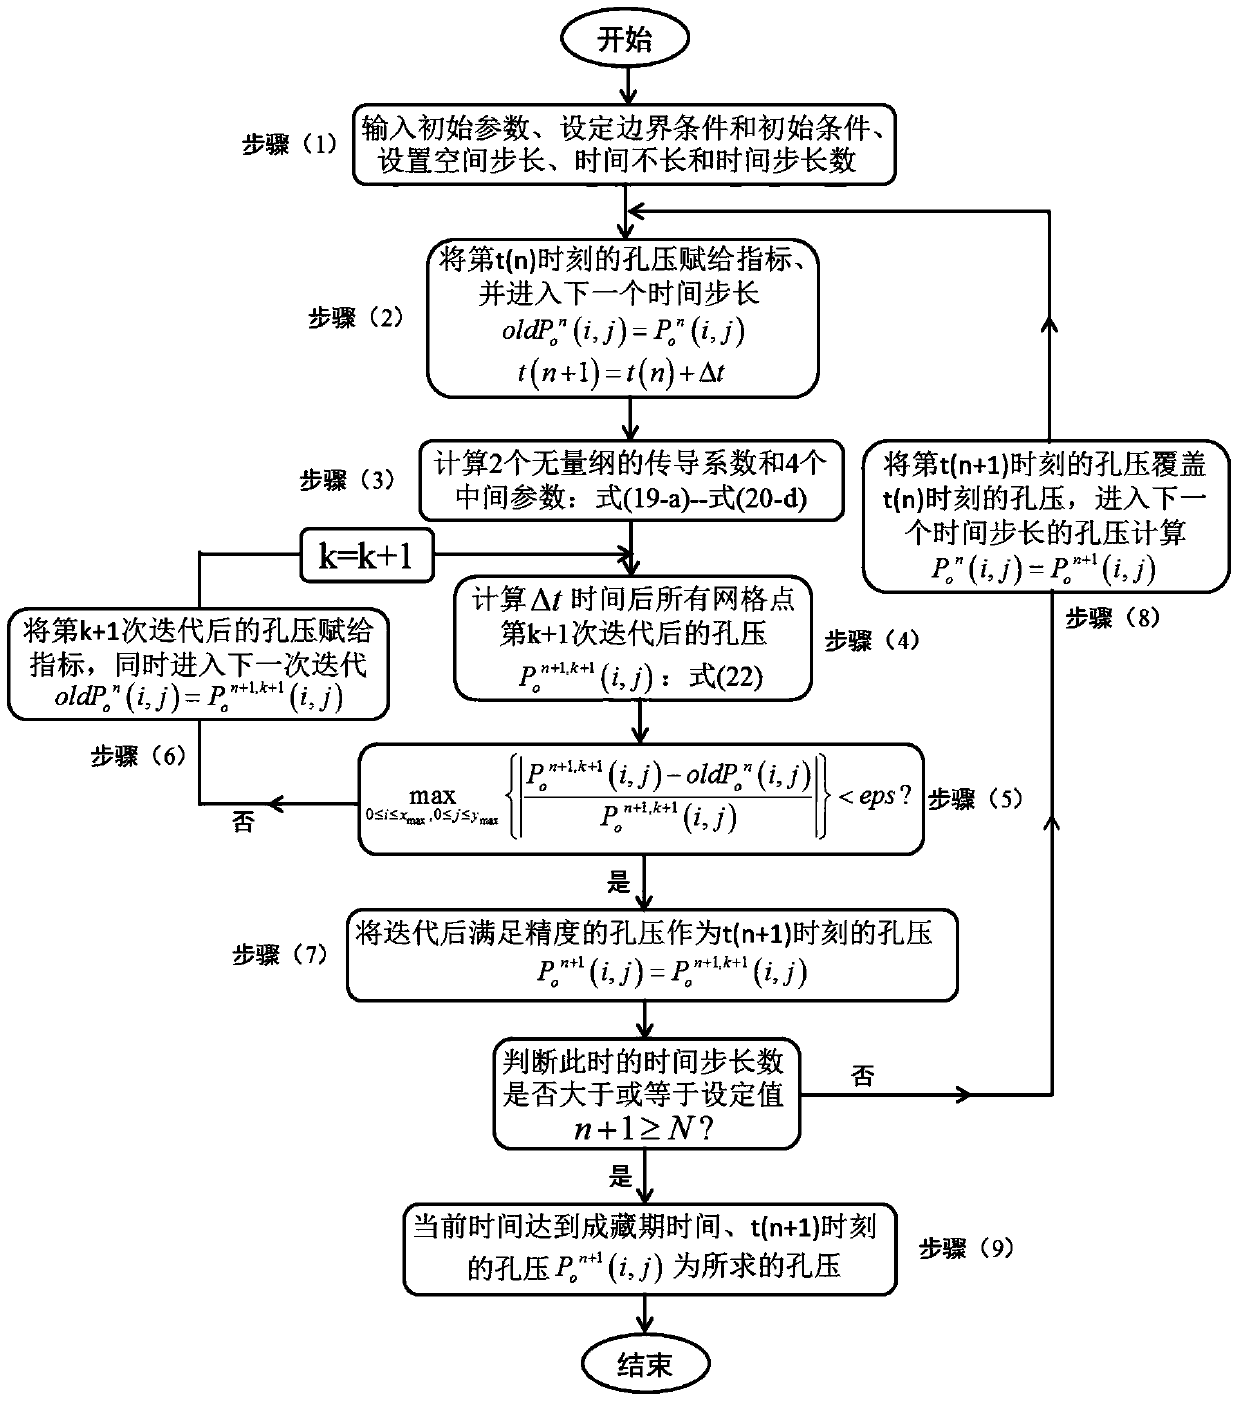 Method for calculating secondary migration rate of crude oil driven by overpressure